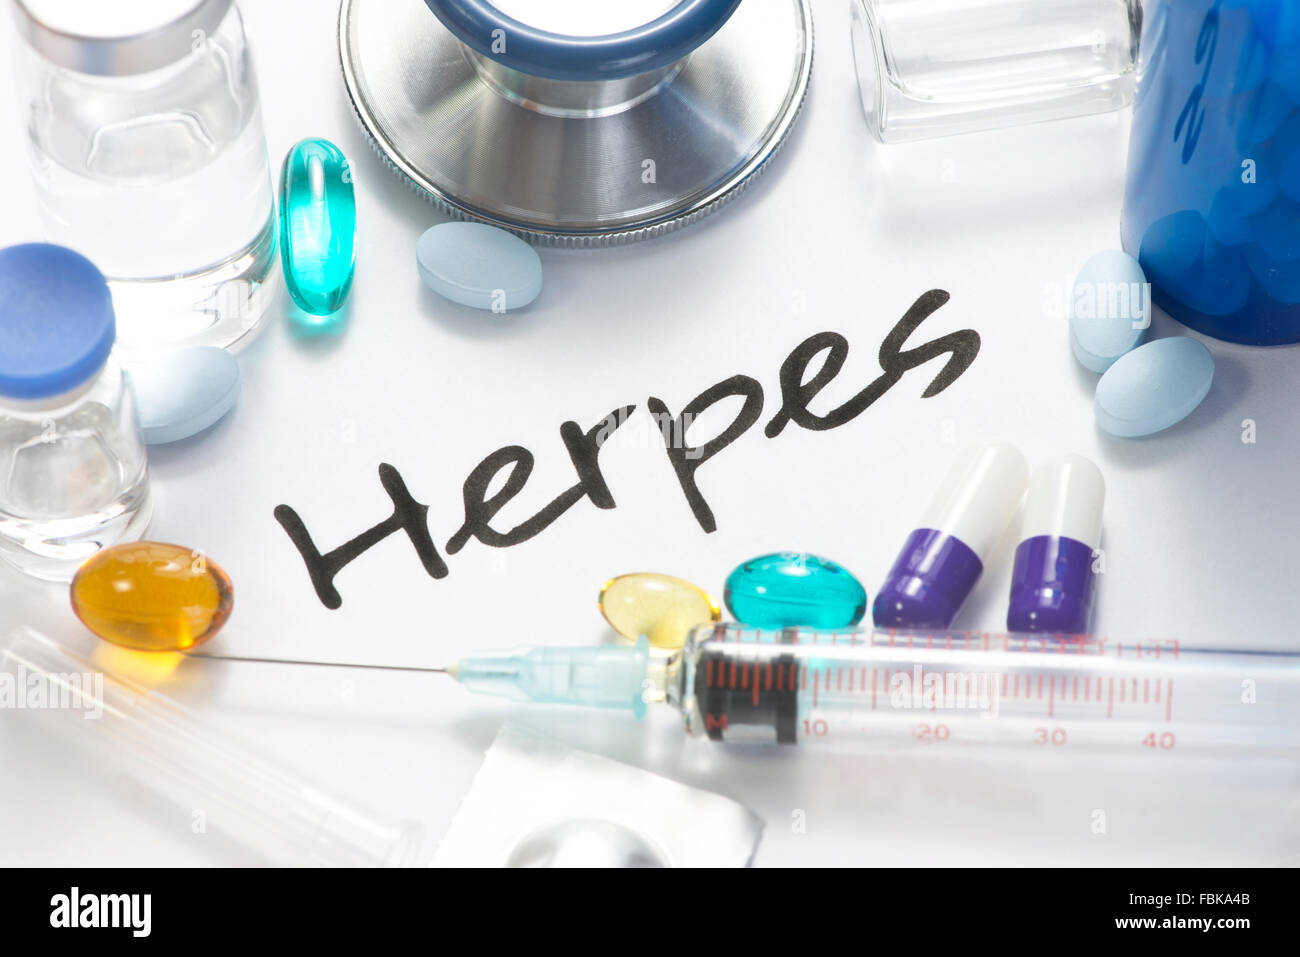 Herpes virus concept photo with pills, vials, and stethoscope. Stock Photo